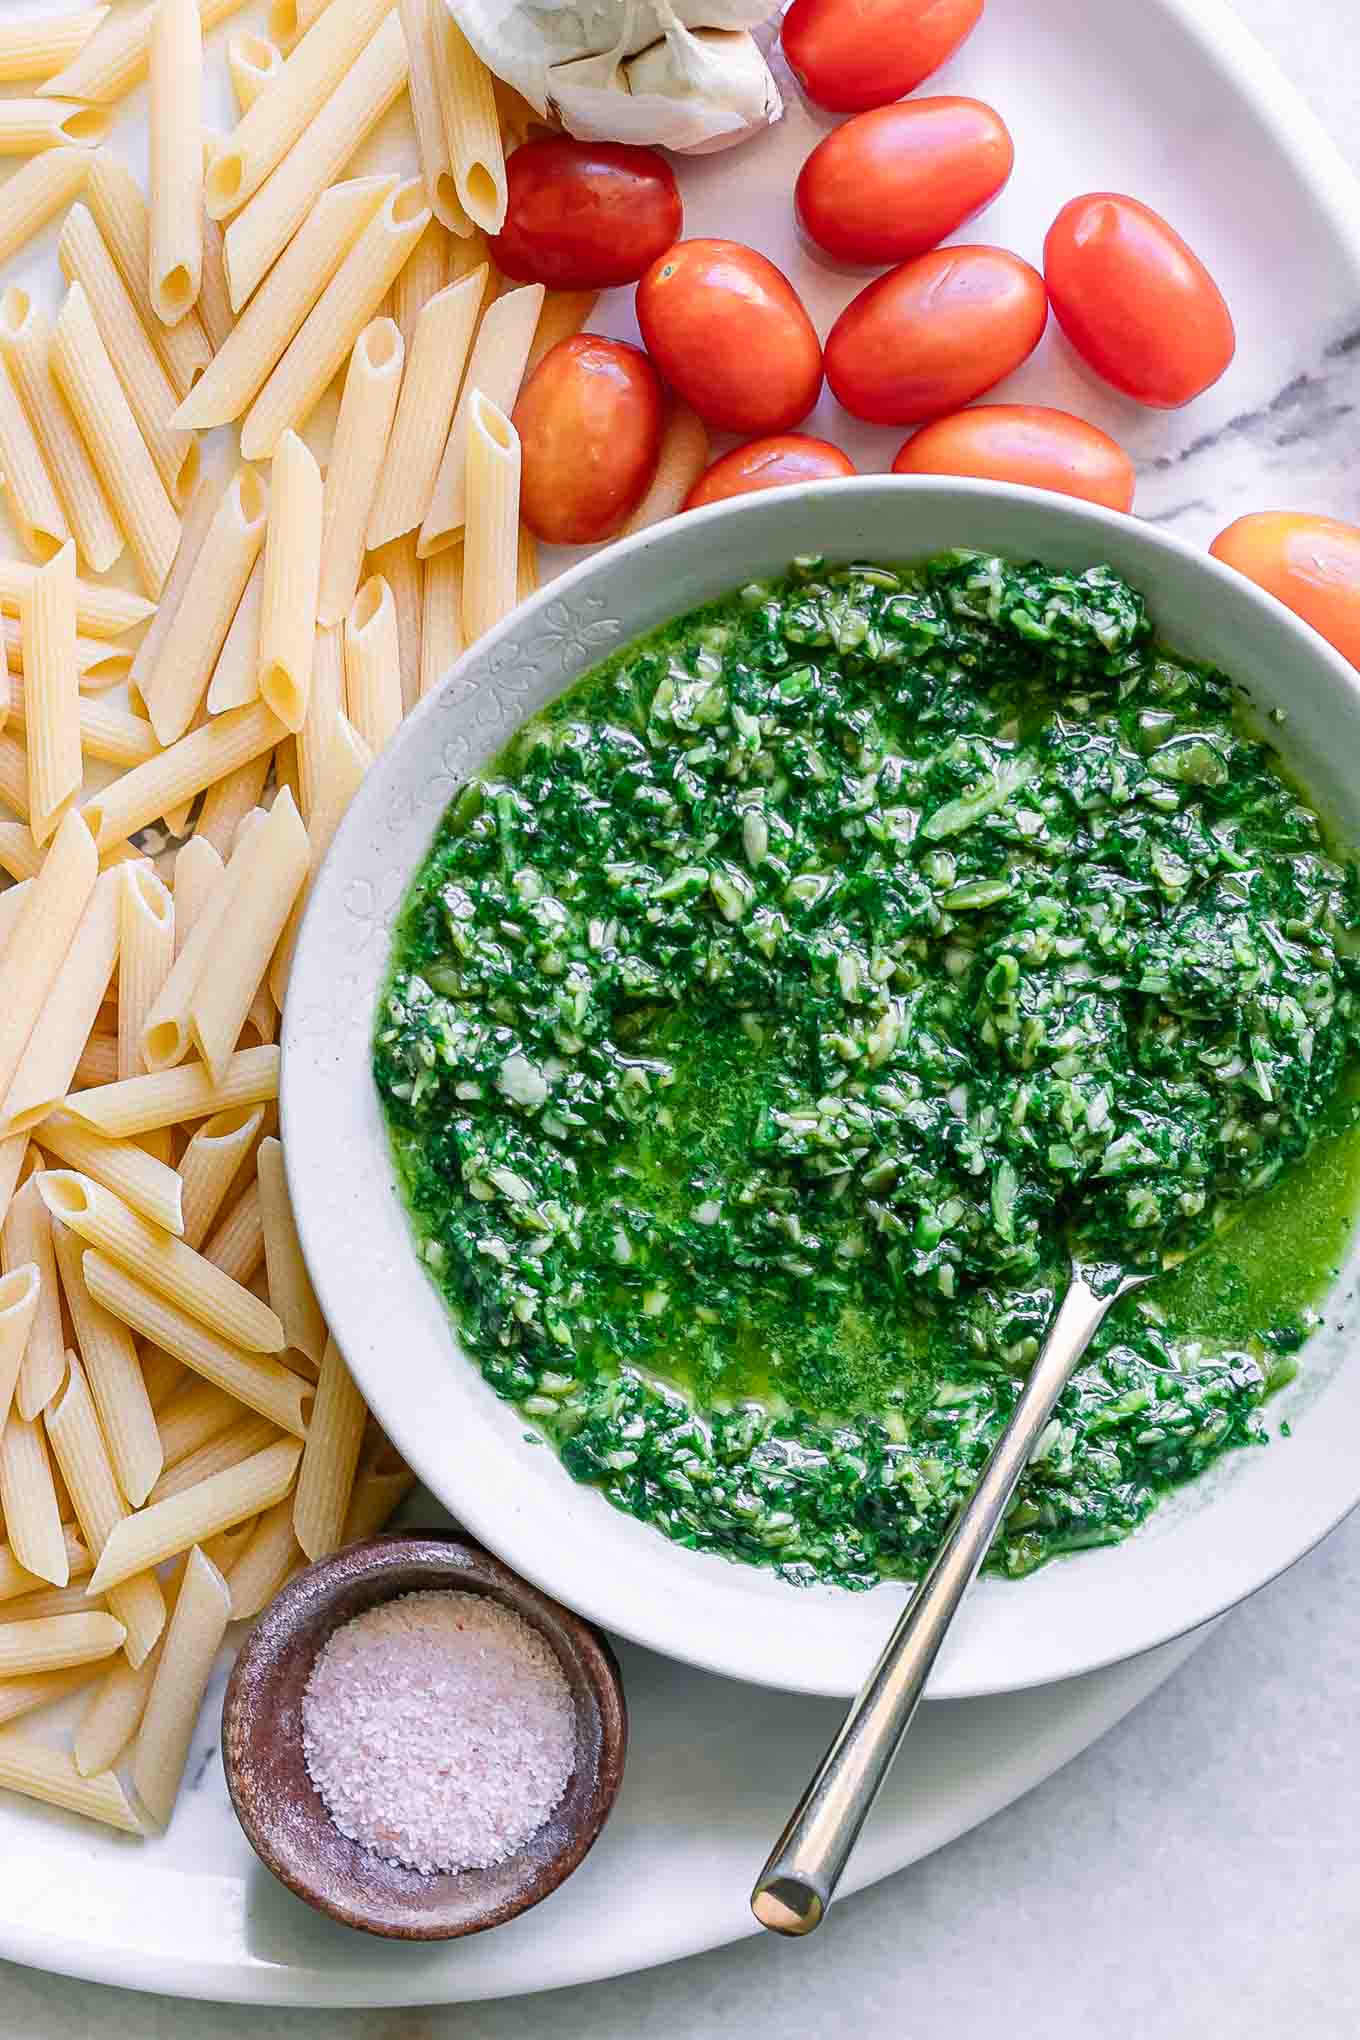 a bowl of pesto sauce on a table with cherry tomatoes, dry penne pasta, garlic, and salt